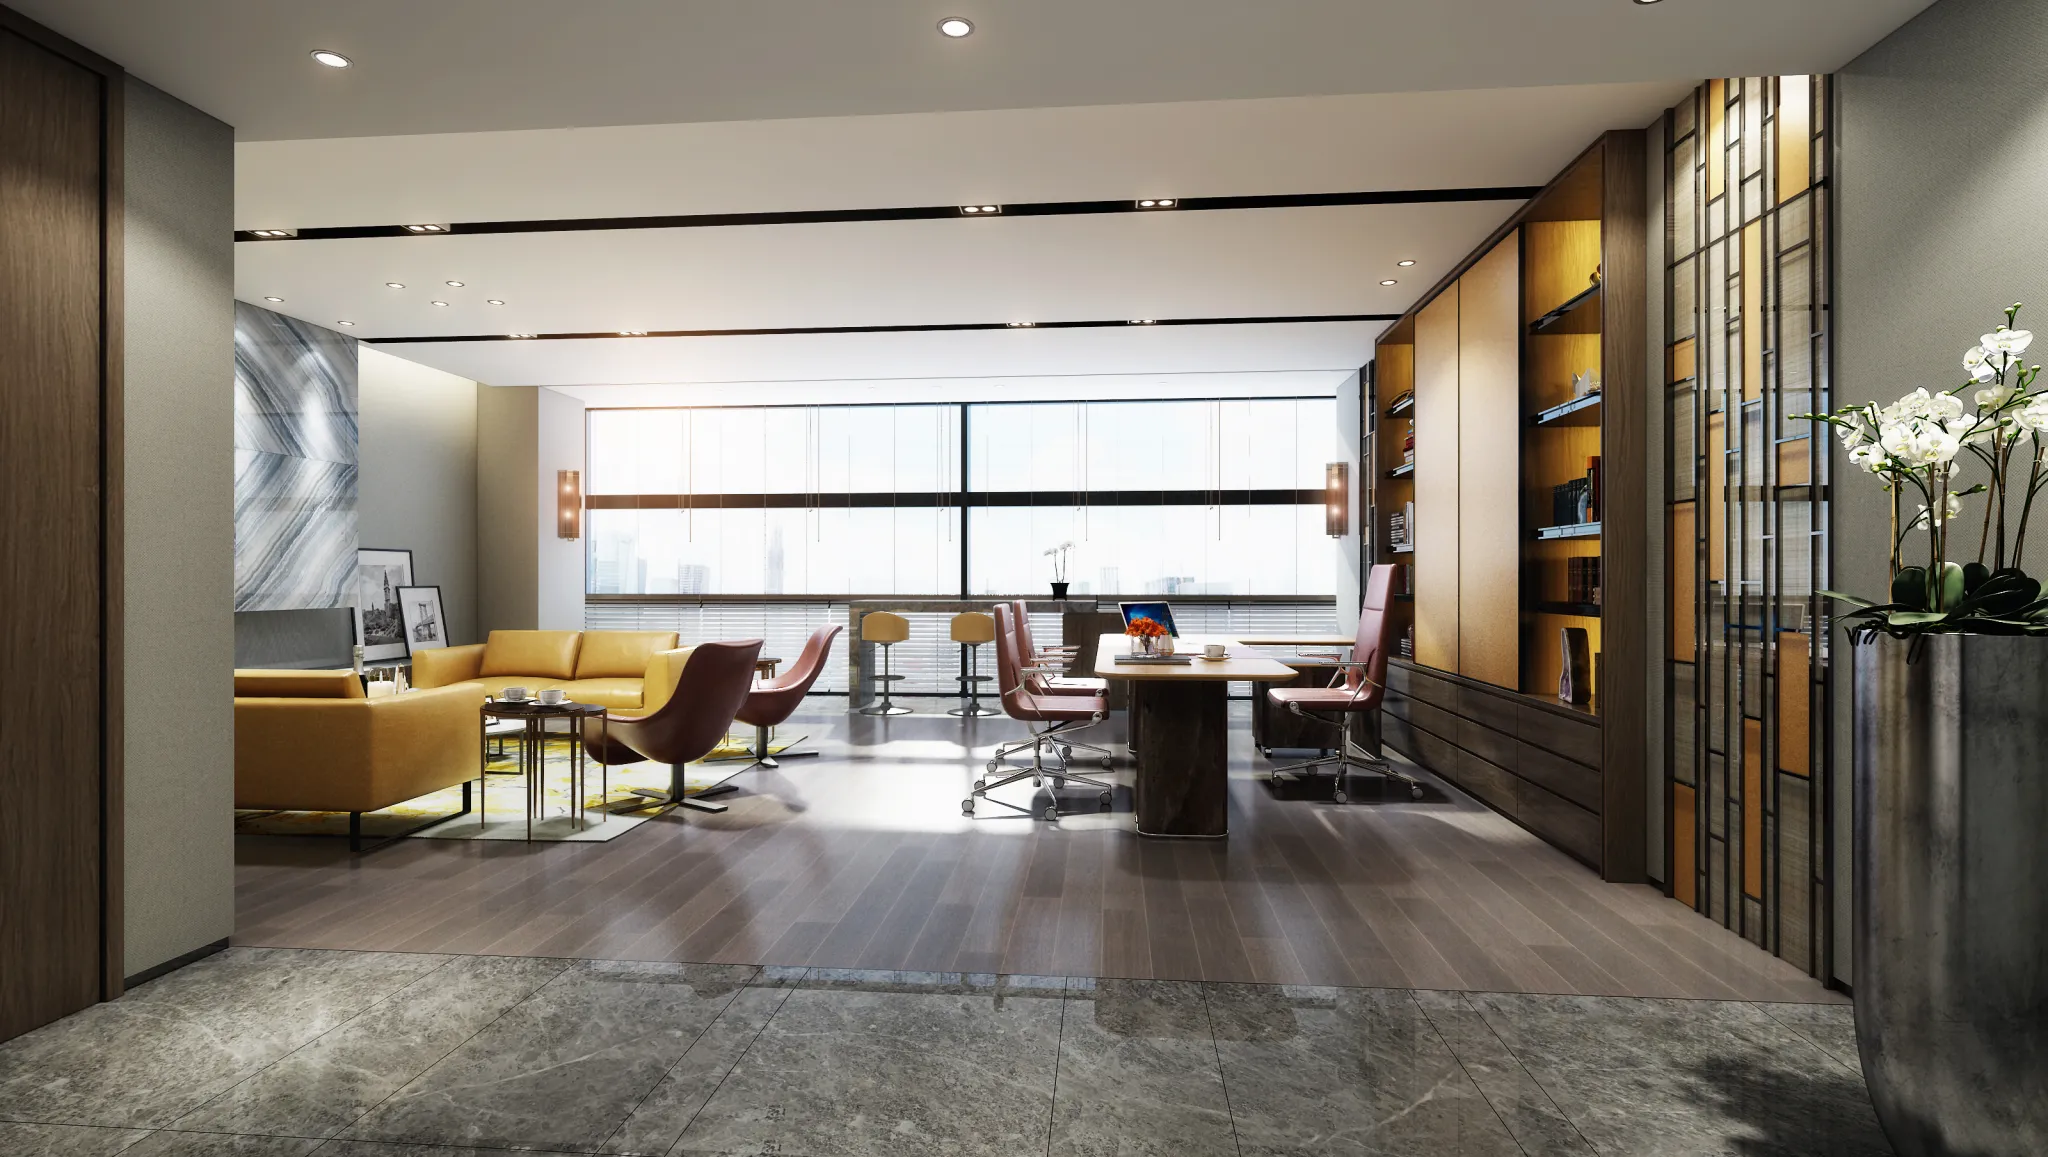 TZ INTERIOR DESIGN 2021 (VRAY) – 21. MANAGER OFFICE – 04